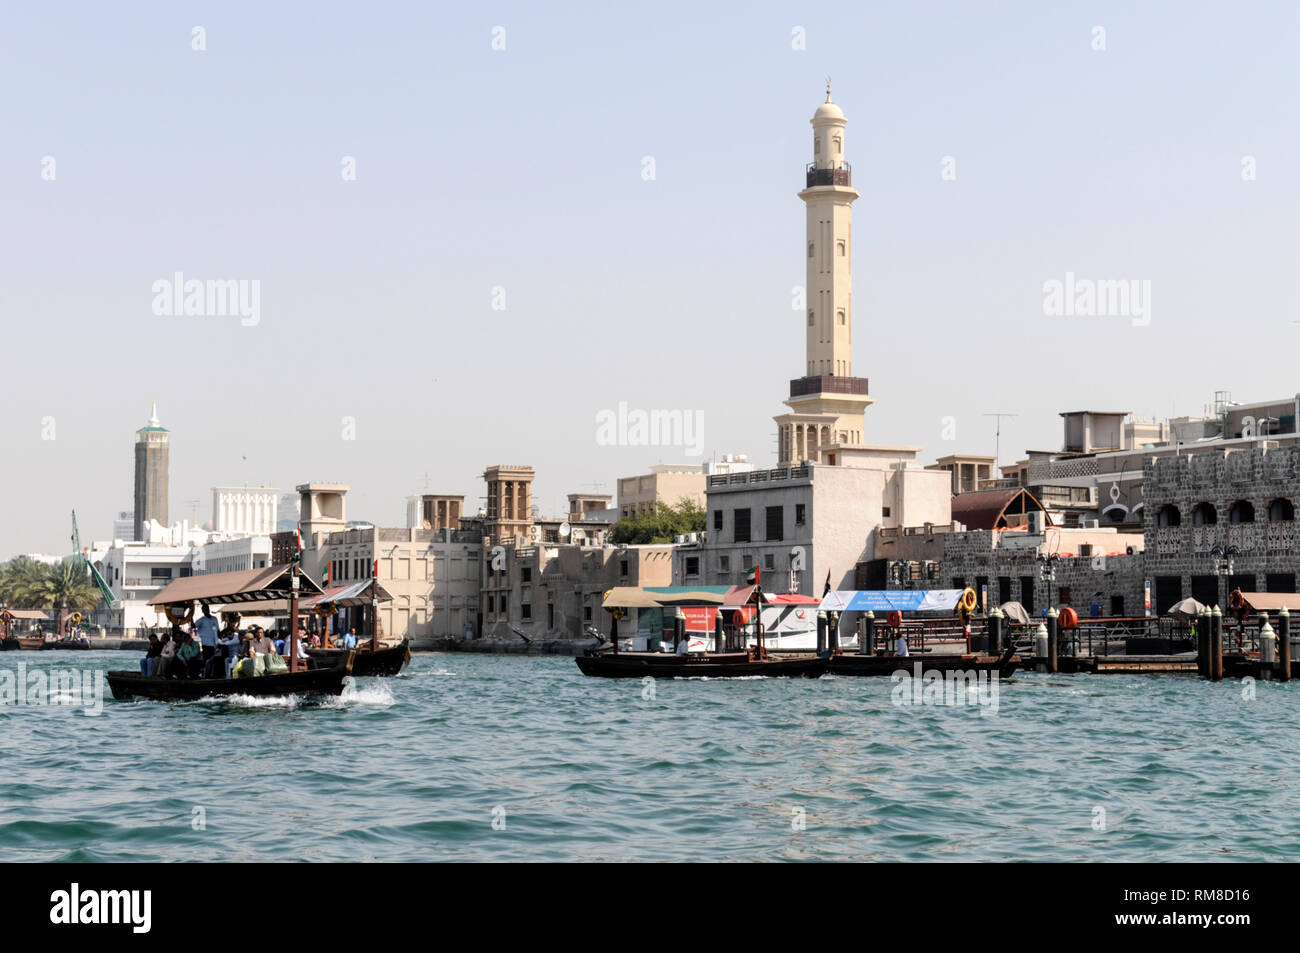 A water taxi passes near the towering minaret of the Grand Bur Dubai Masjid overlooking the Creek in the Al Souq Al Kabeer district of Dubai in the Un Stock Photo